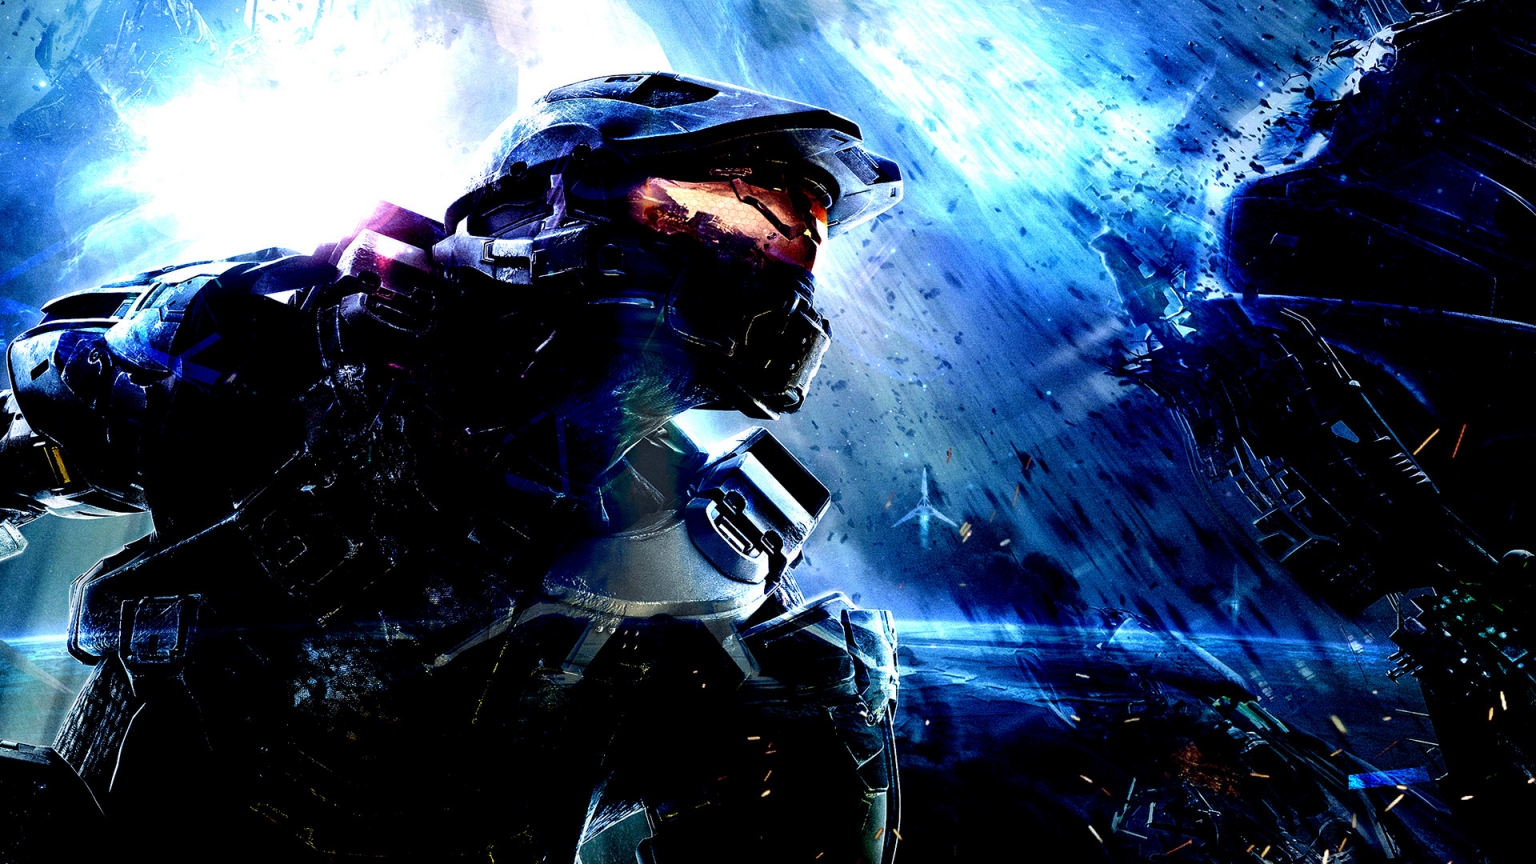 Halo 4 Complex for 1536 x 864 HDTV resolution